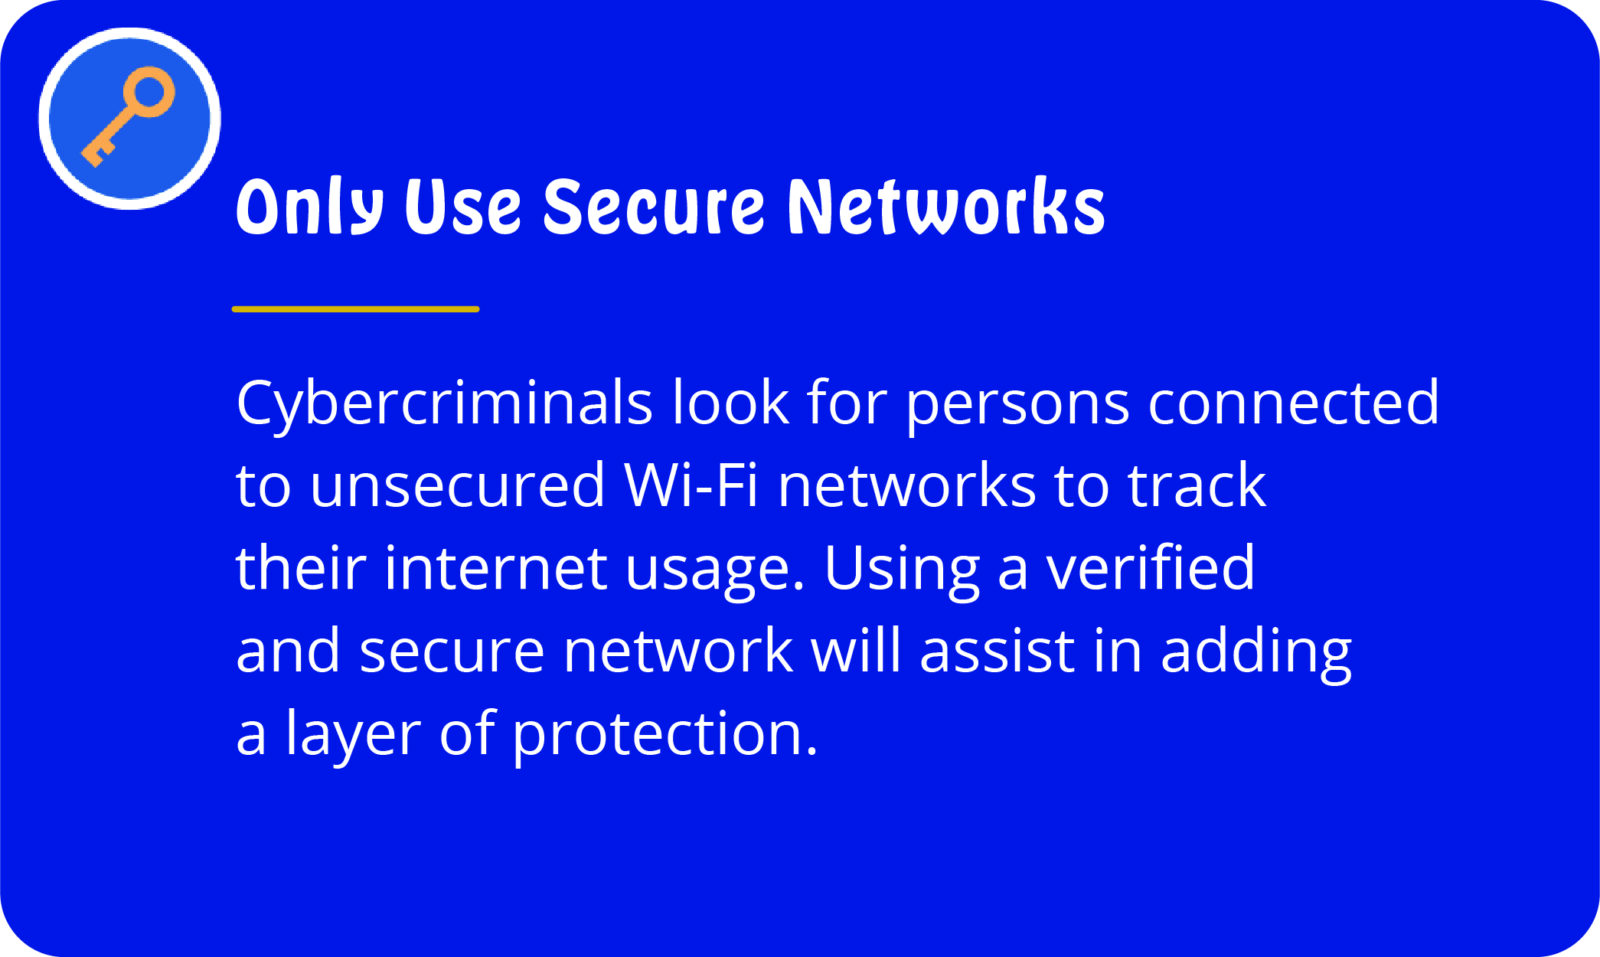 Recommendation to use only secured networks.